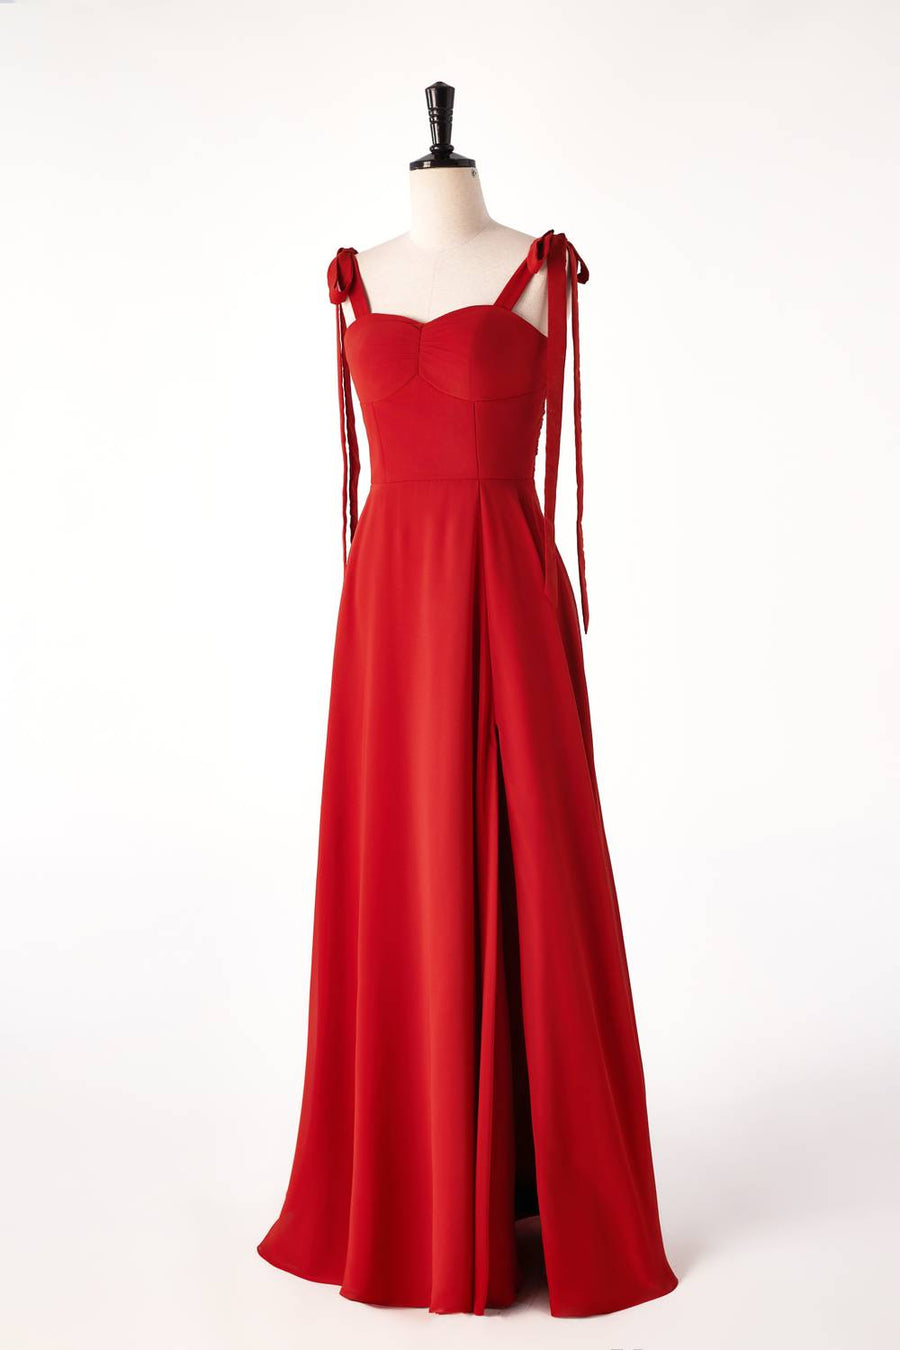 Rust Red Chiffon Long Bridesmaid Dress with Tie Shoulders